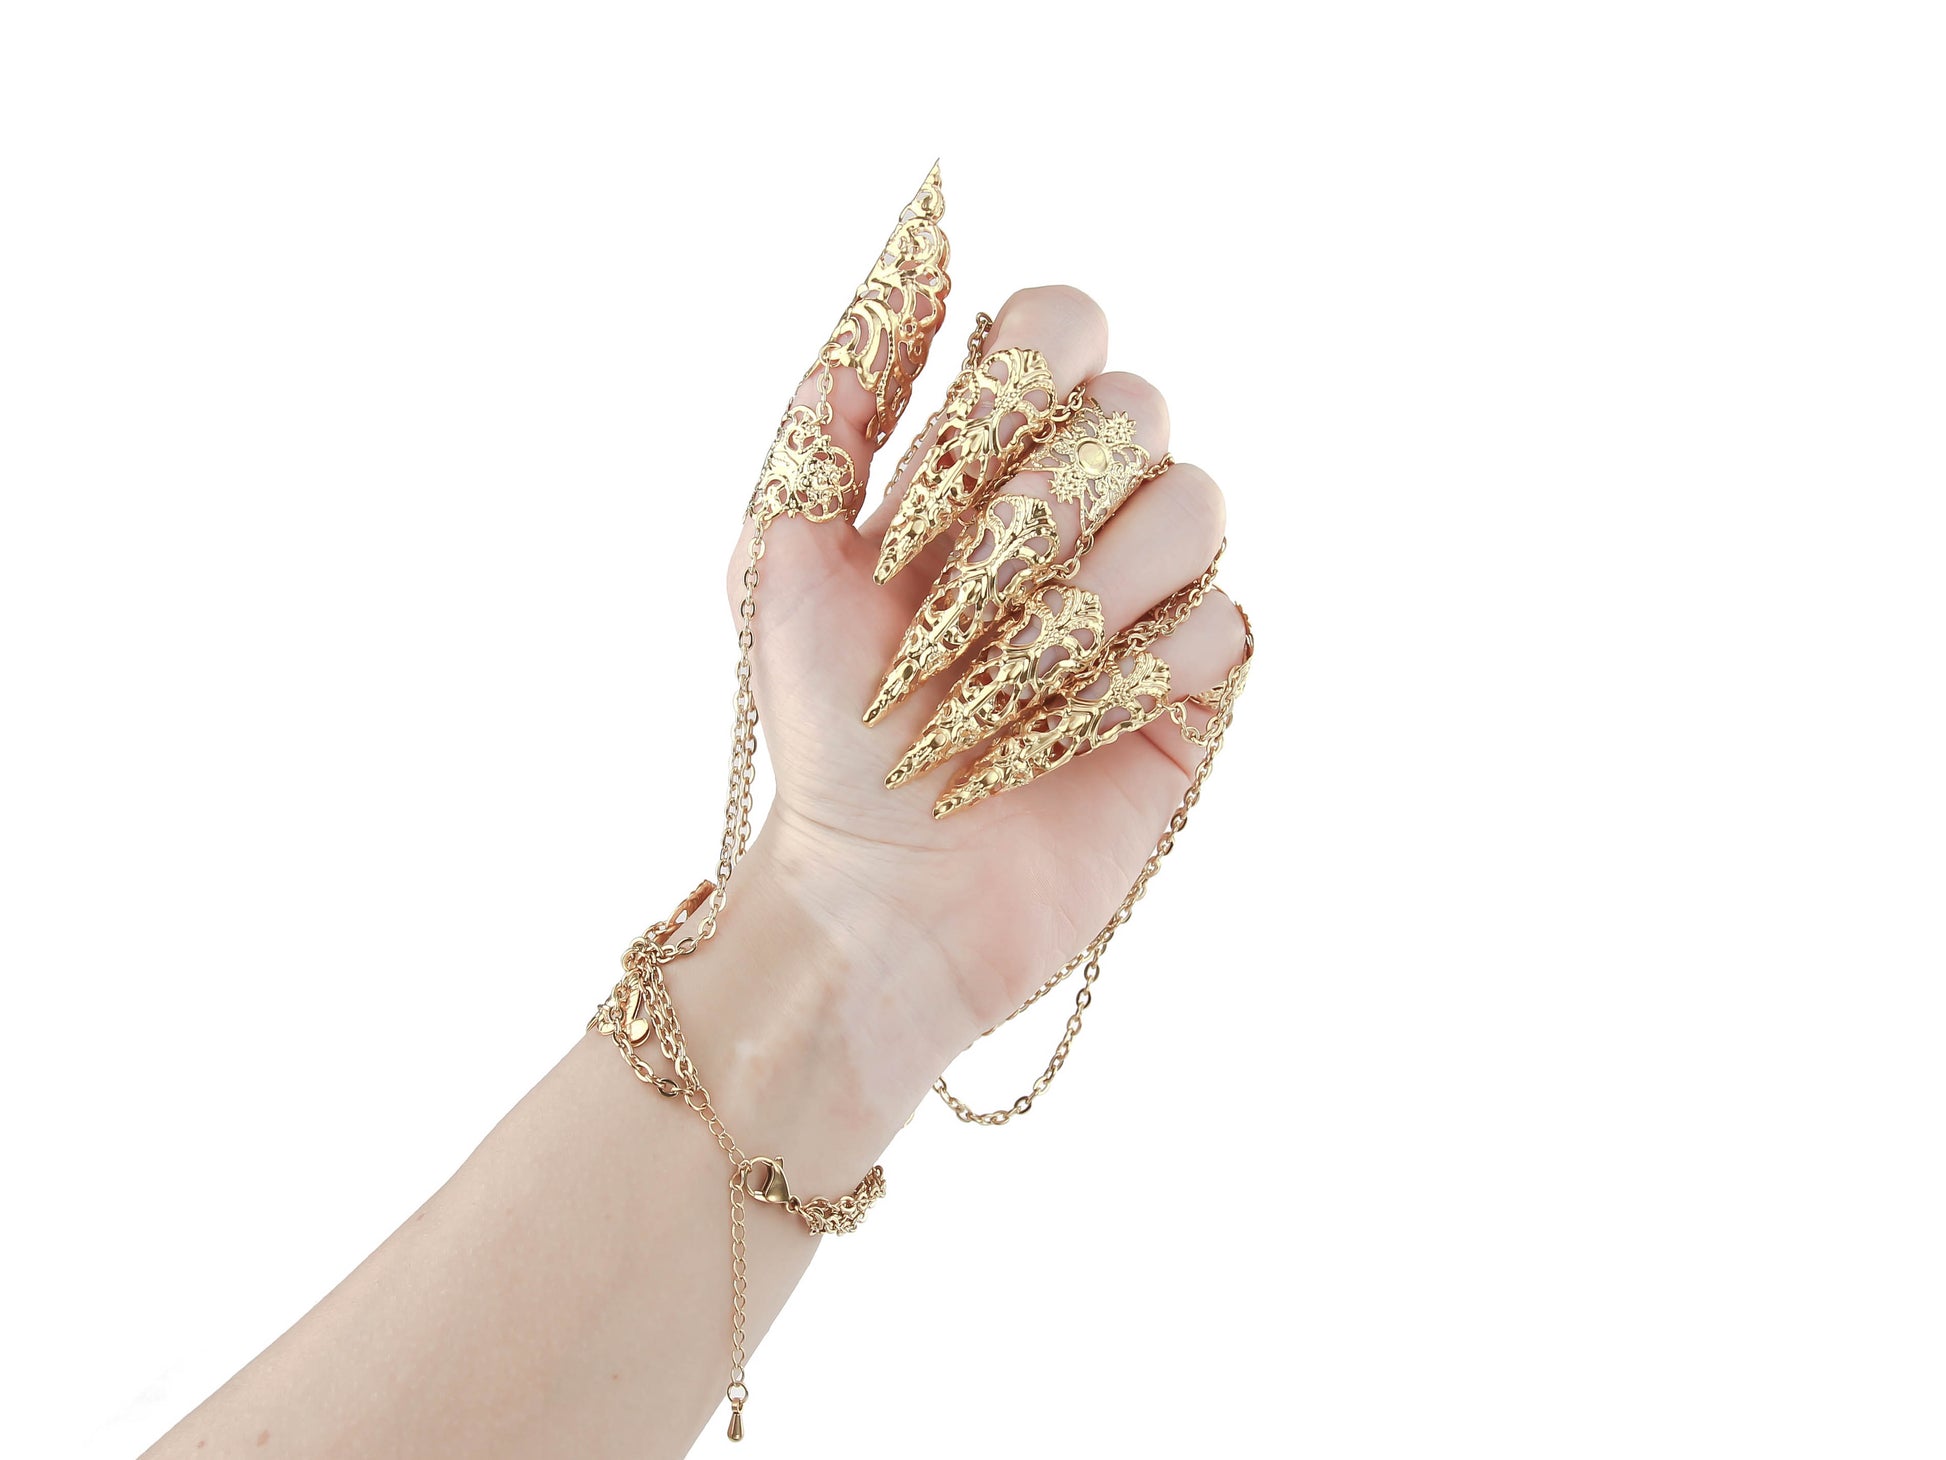 A captivating gold metal glove with finger claw rings from Myril Jewels, combining gothic-chic with neo-goth design. Ideal for Halloween, this unique piece makes a bold statement for witchcore lovers and is perfect for adding a daring touch to everyday wear or festival outfits.